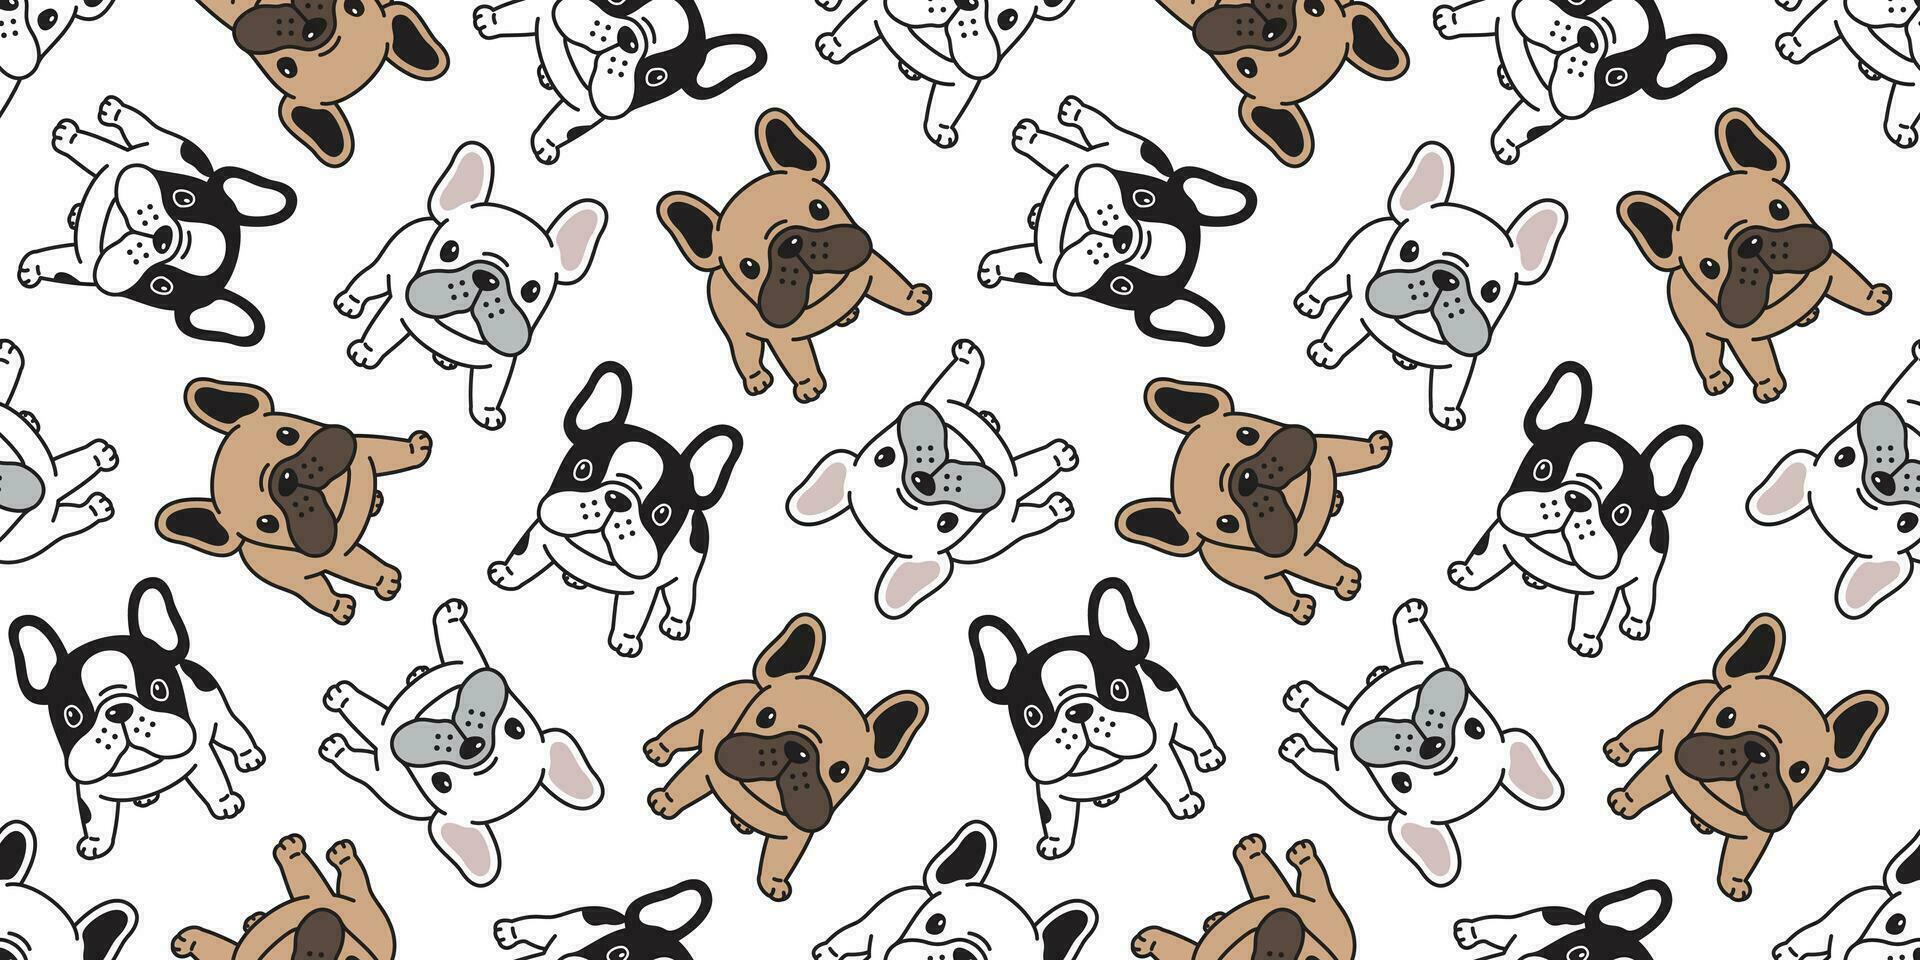 Dog seamless pattern french bulldog vector pet scarf isolated puppy cartoon illustration tile background repeat wallpaper